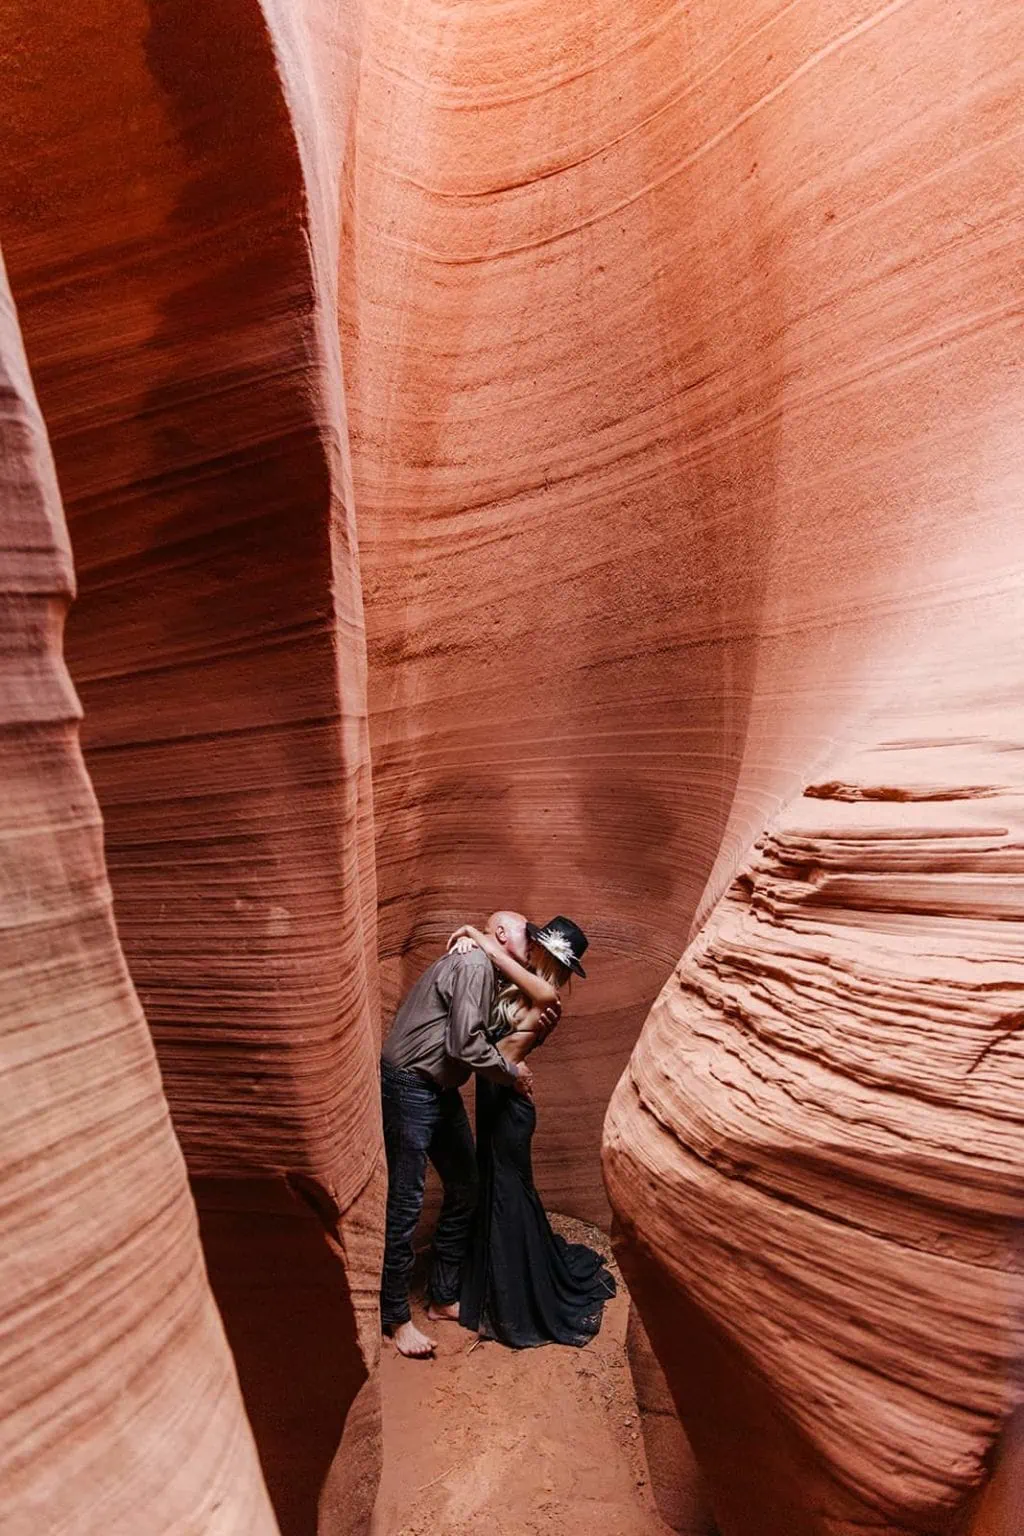 A groom kisses his bride among the walls of a red rock slot canyon.